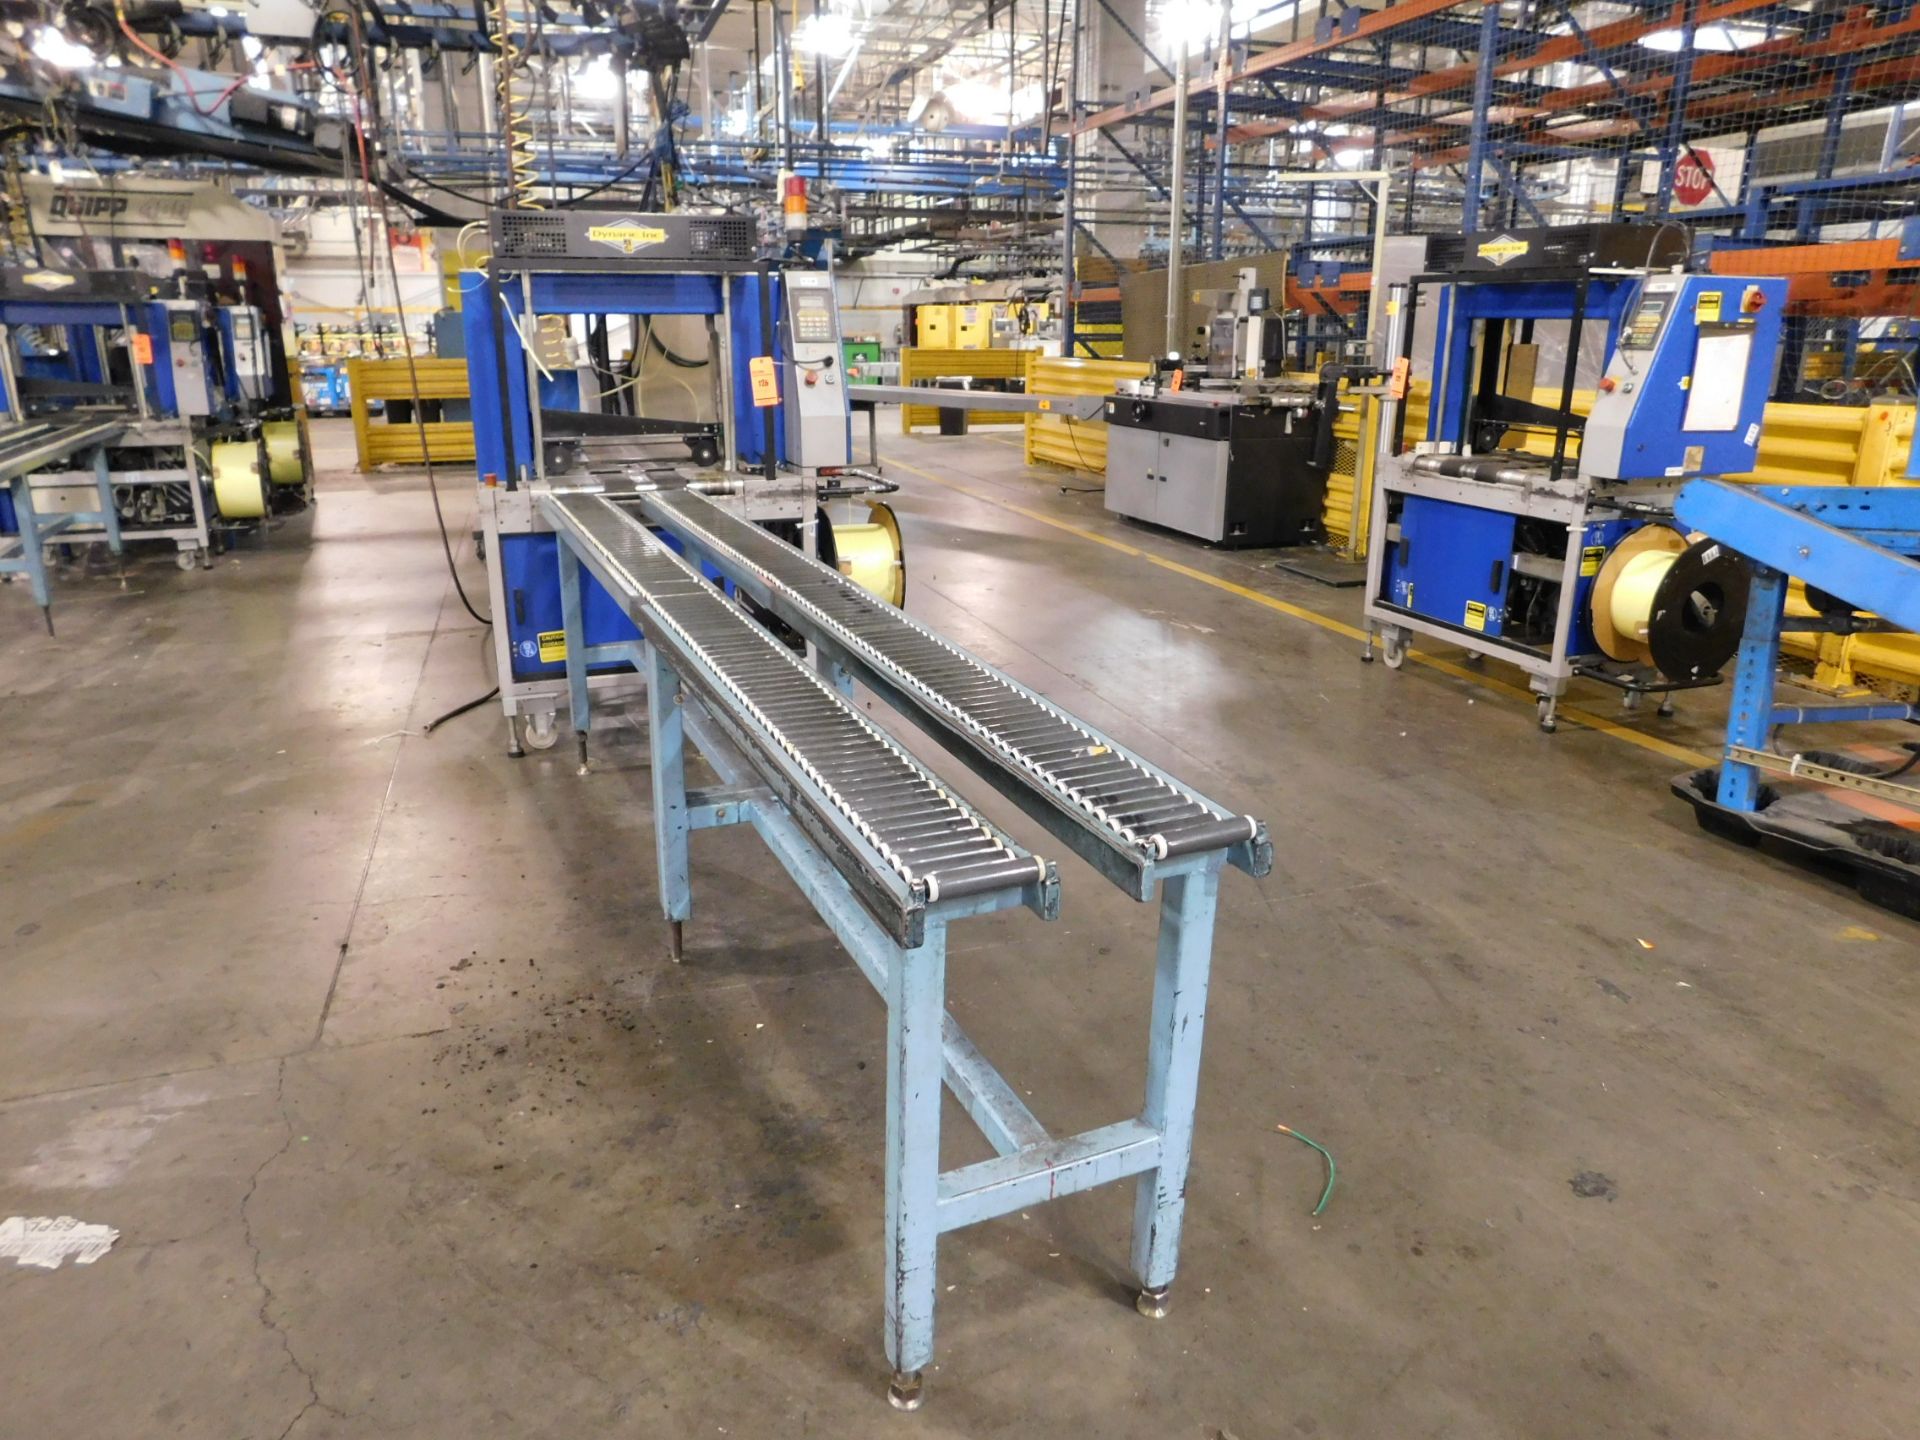 2002 Dynark banding machine with discharge roller conveyor, 10 ft. long by 18 in. wide, asset # T18, - Image 2 of 3